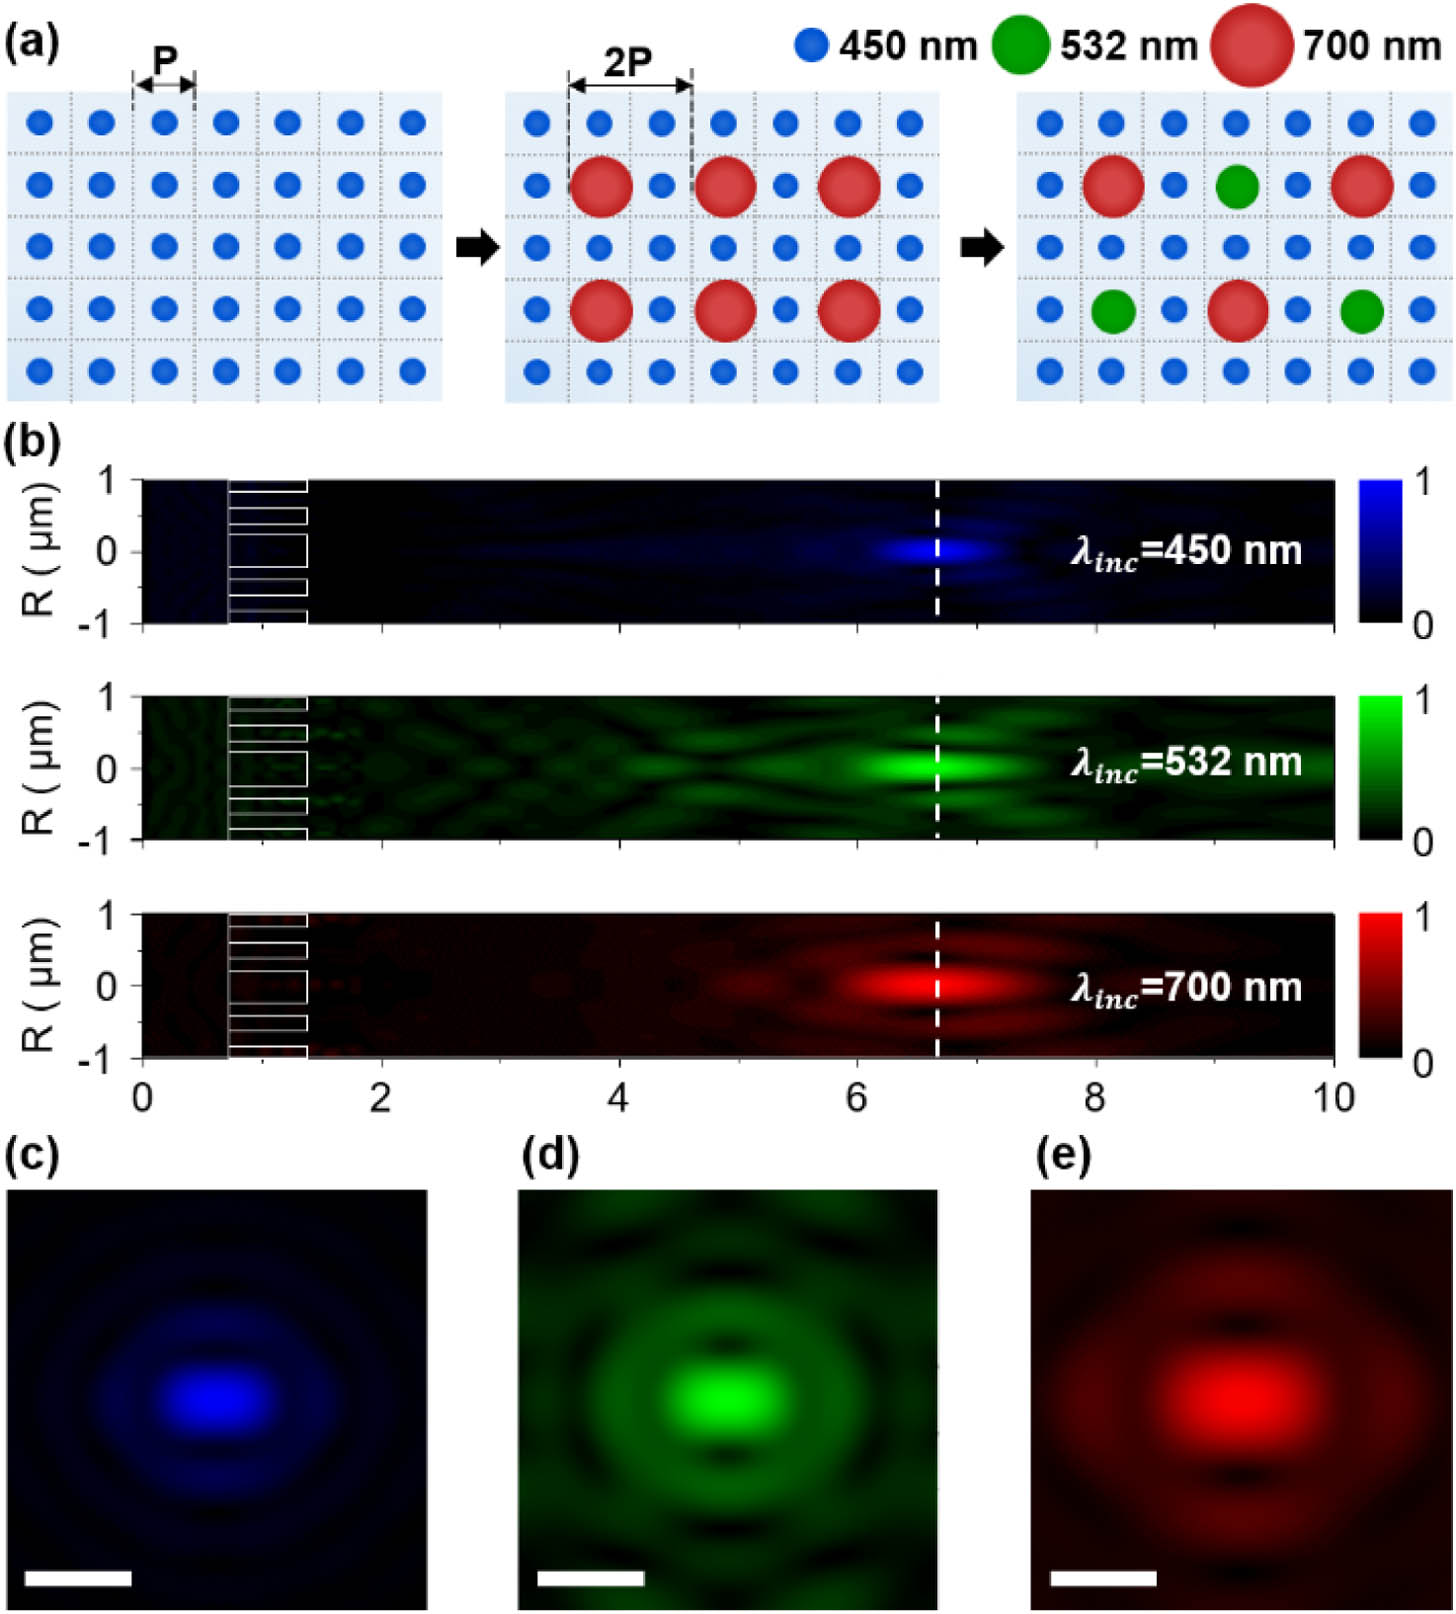 (a) Schematic illustrations of spatial interleaving method with three meta-atoms: λ=450, 532, and 700 nm for blue, green, and red circles, respectively. (b) Simulated cross-sectional normalized electric field distributions of the metalens at λ=450 nm (top), 532 nm (middle), and 700 nm (bottom) in the focal region. (c)–(e) Calculated normalized electric field distributions at the focal spot at λ of (c)450 nm, (d) 532 nm, and (e) 700 nm. Scale bar: 500 nm.